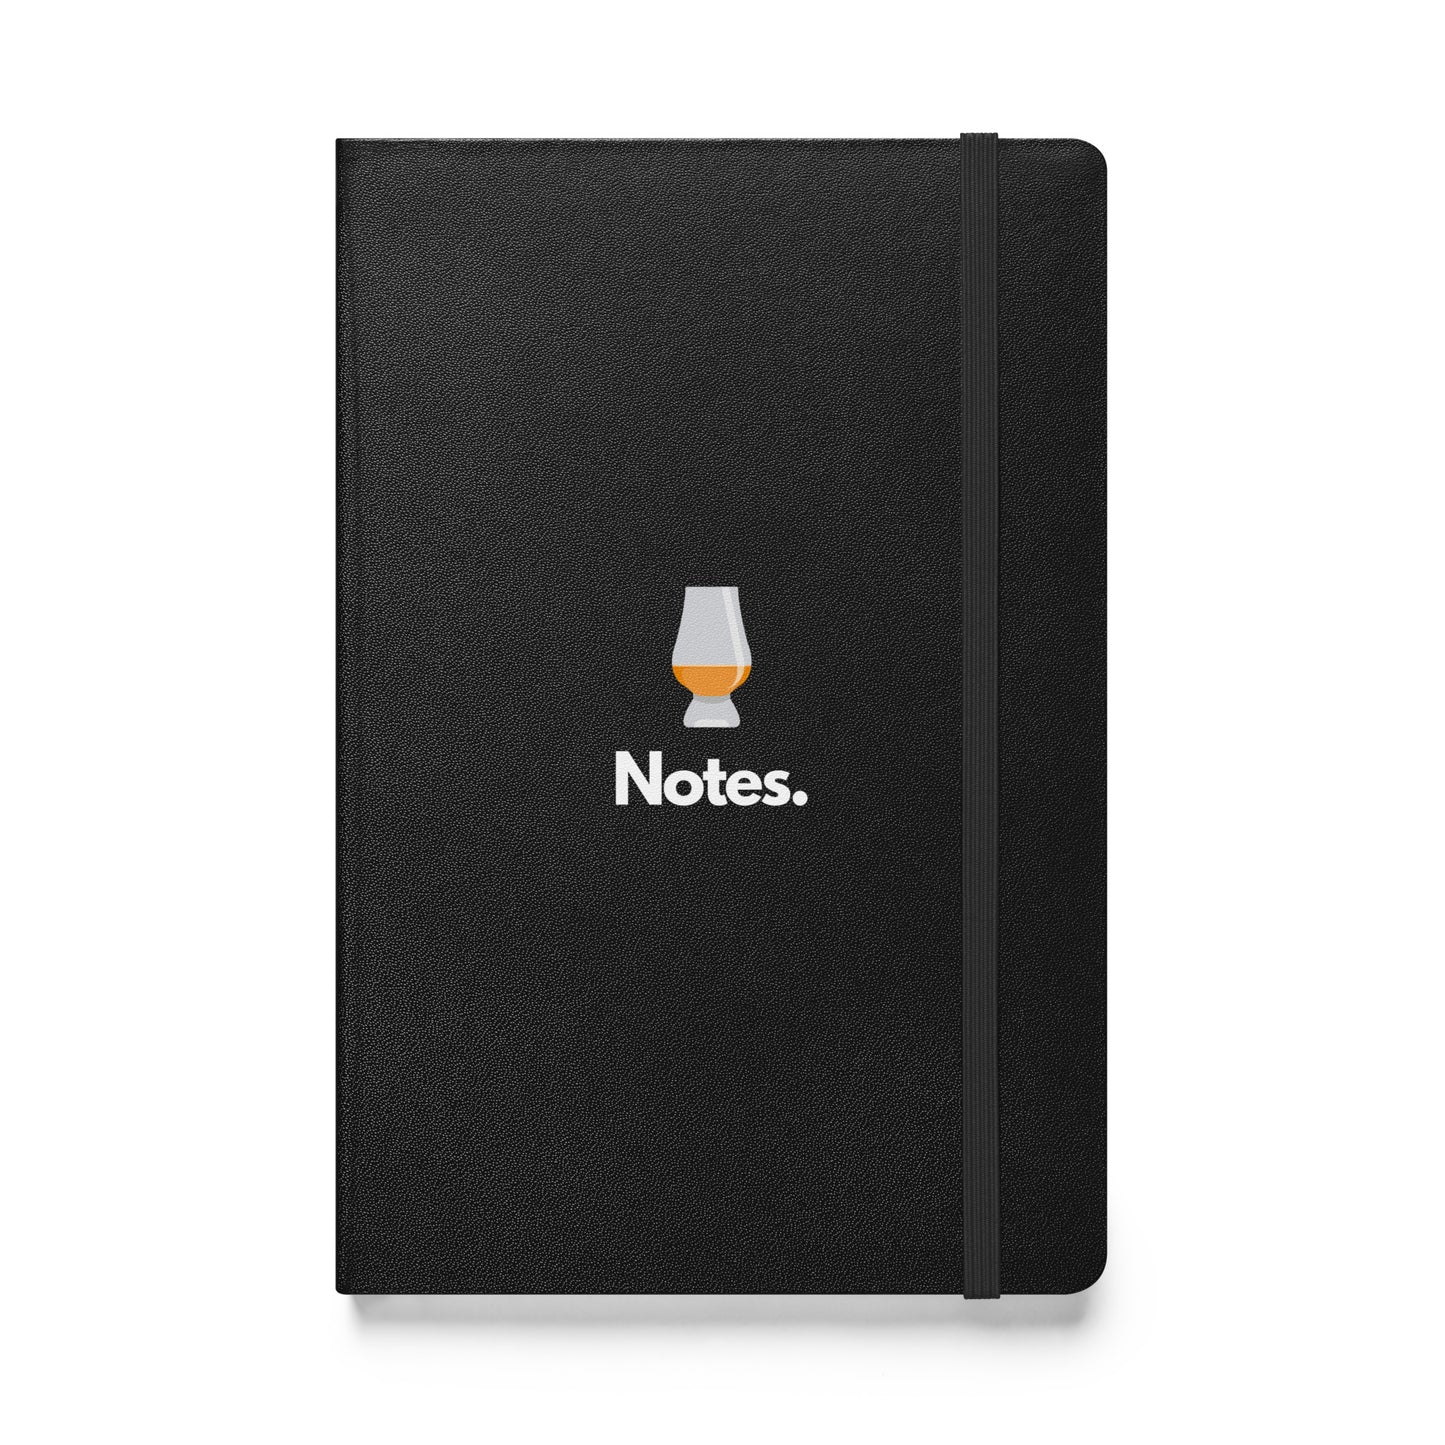 Whiskey Tasting Notes - Hardcover bound notebook